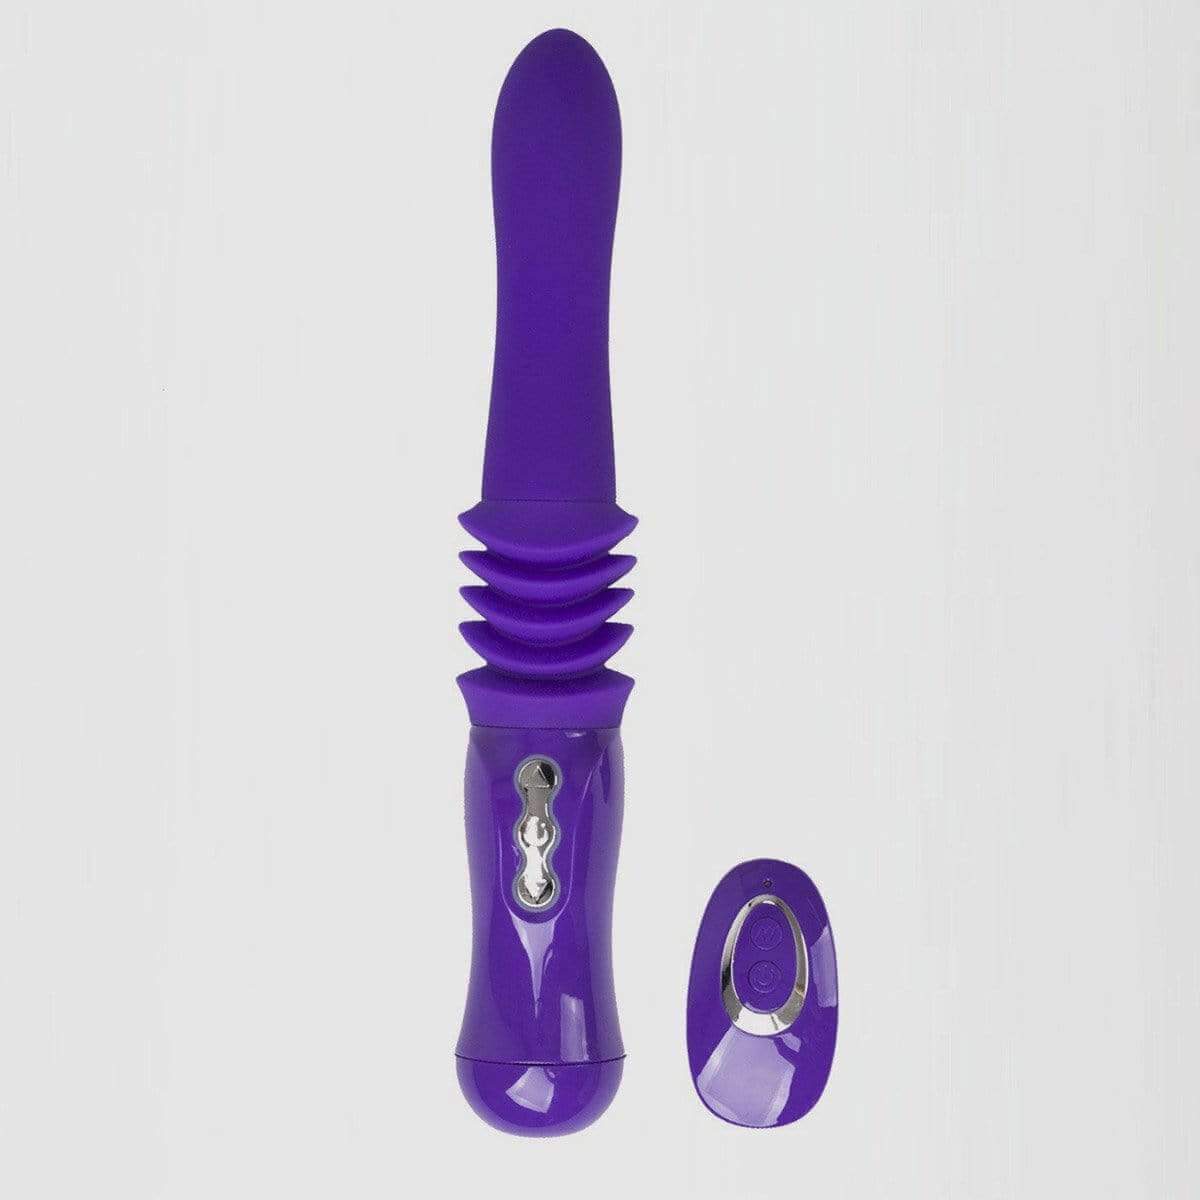 MONROE USB Rechargable Silicone Thrusting Portable Love Machine - Purple - Thorn & Feather Sex Toy Canada